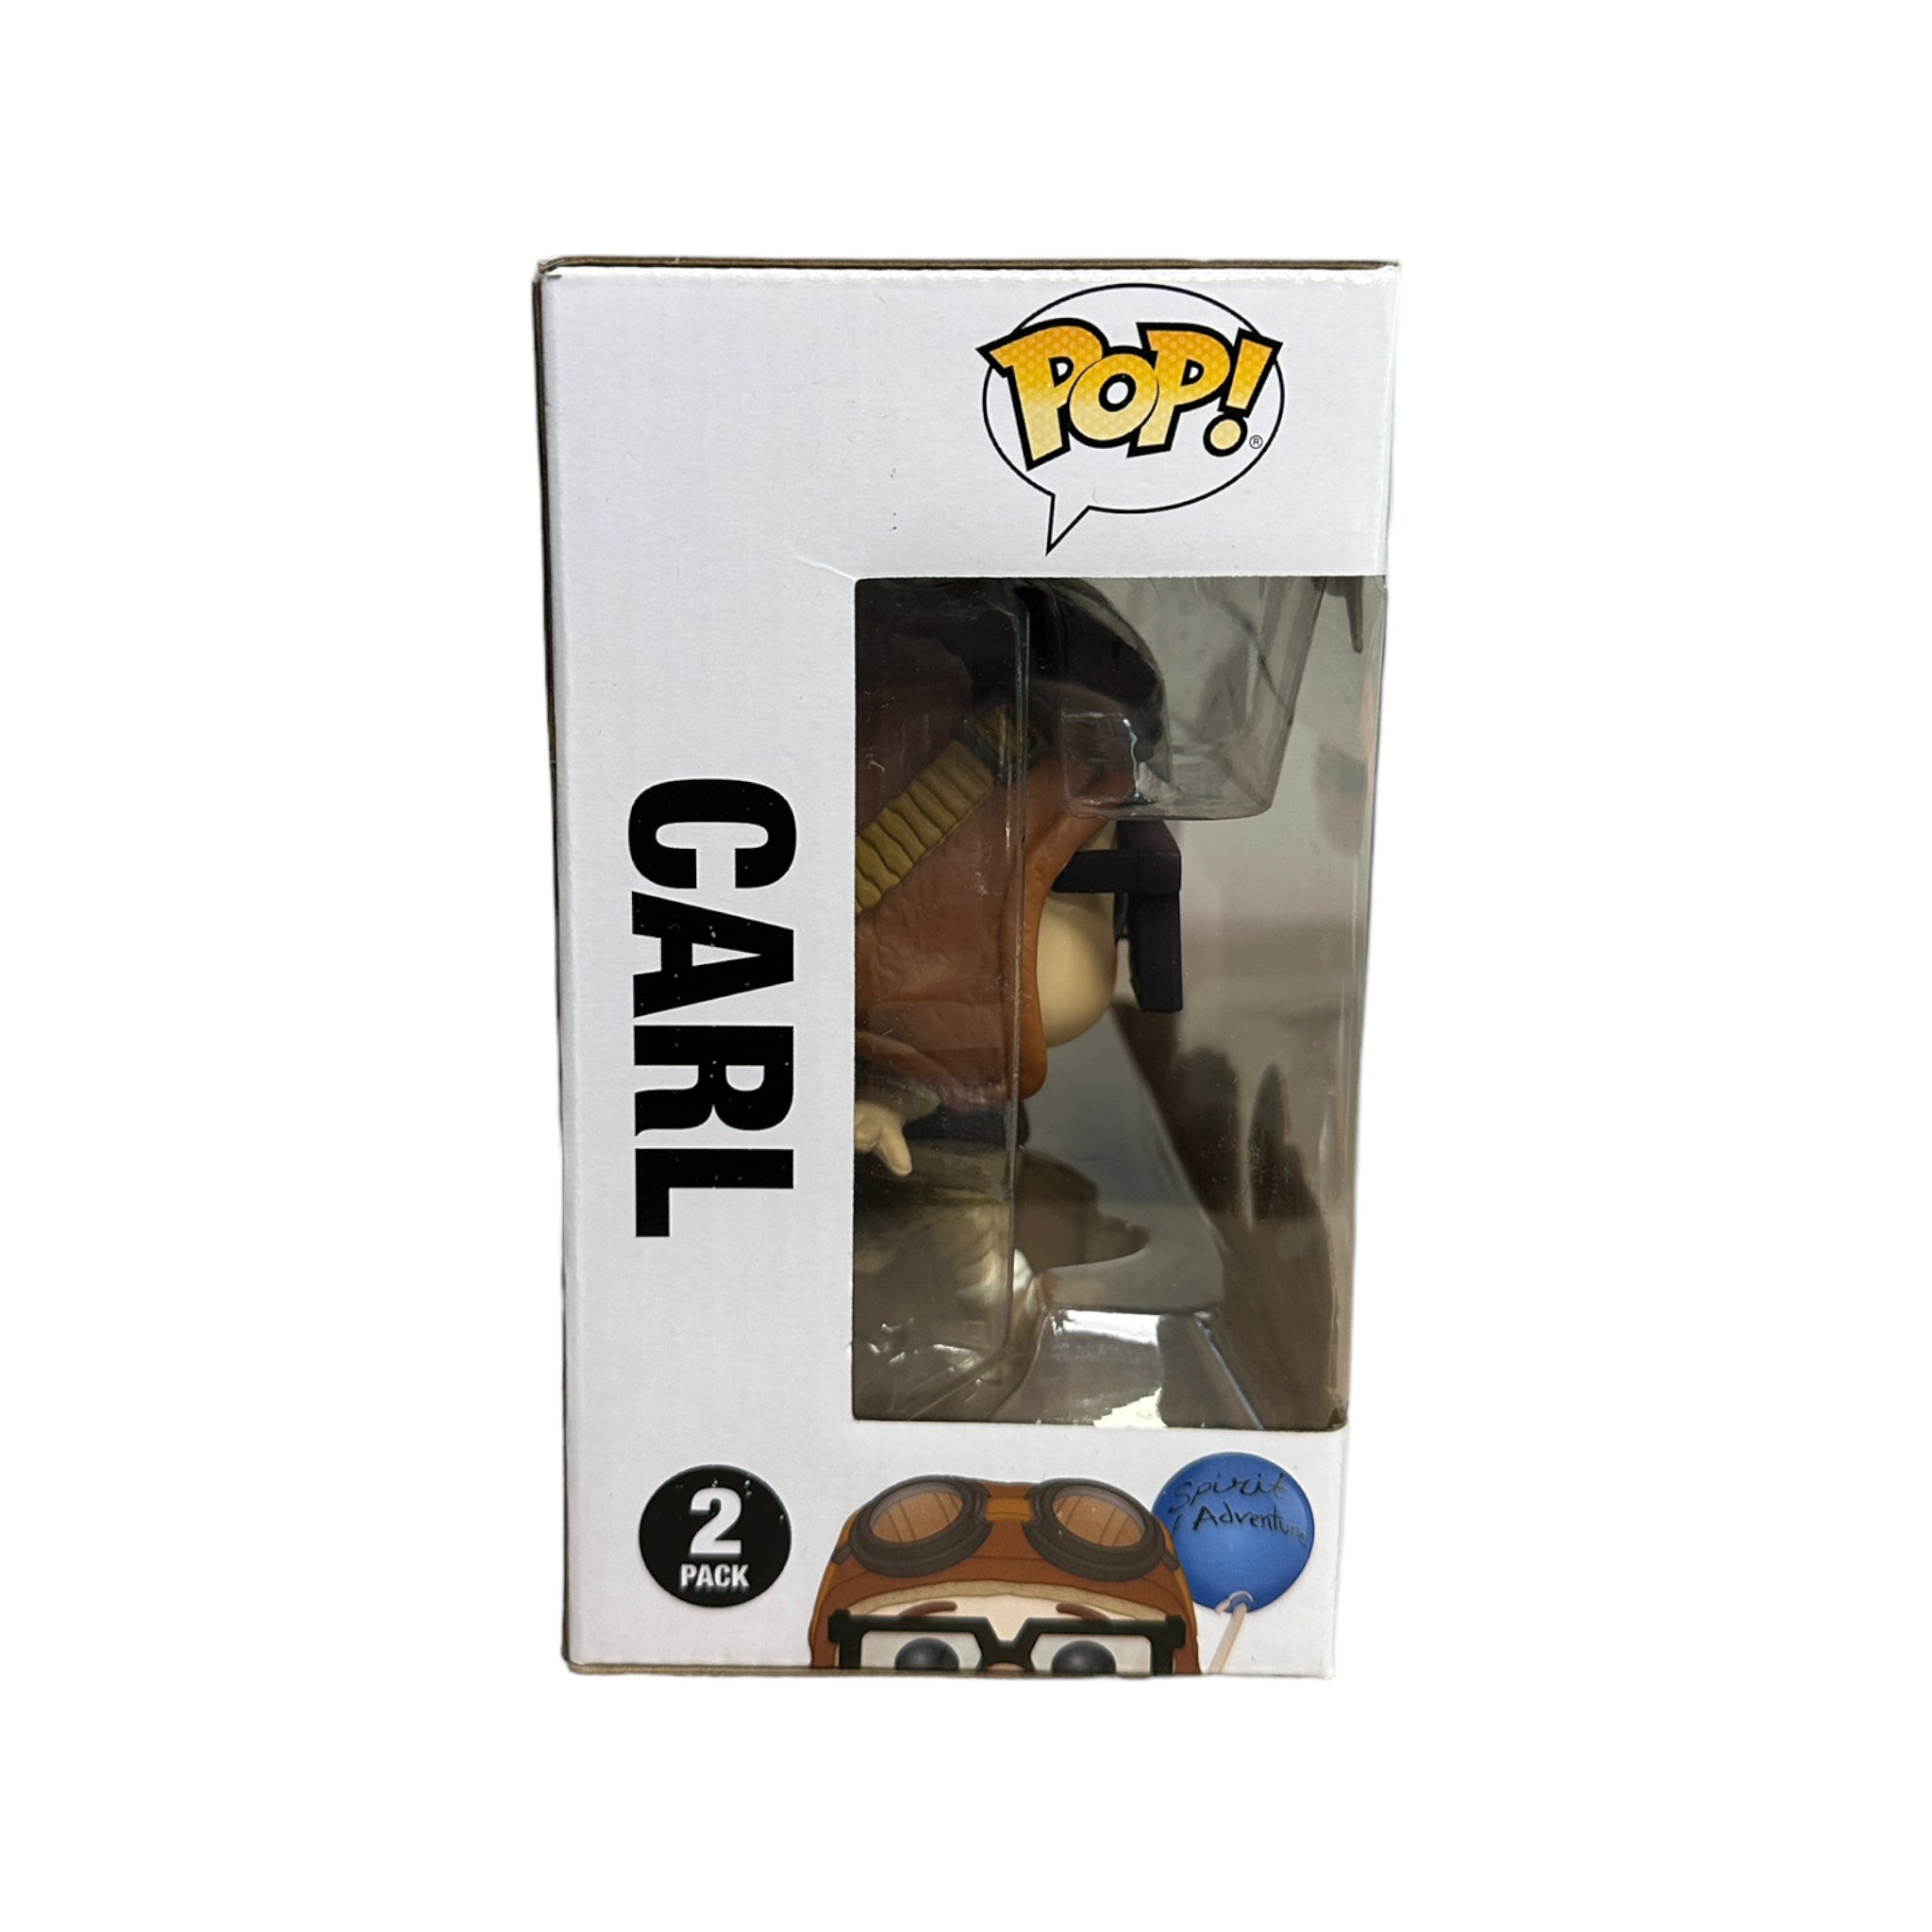 Carl & Ellie 2 Pack Funko Pop! - UP - SDCC 2019 Official Convention Exclusive - Condition 8.75/10